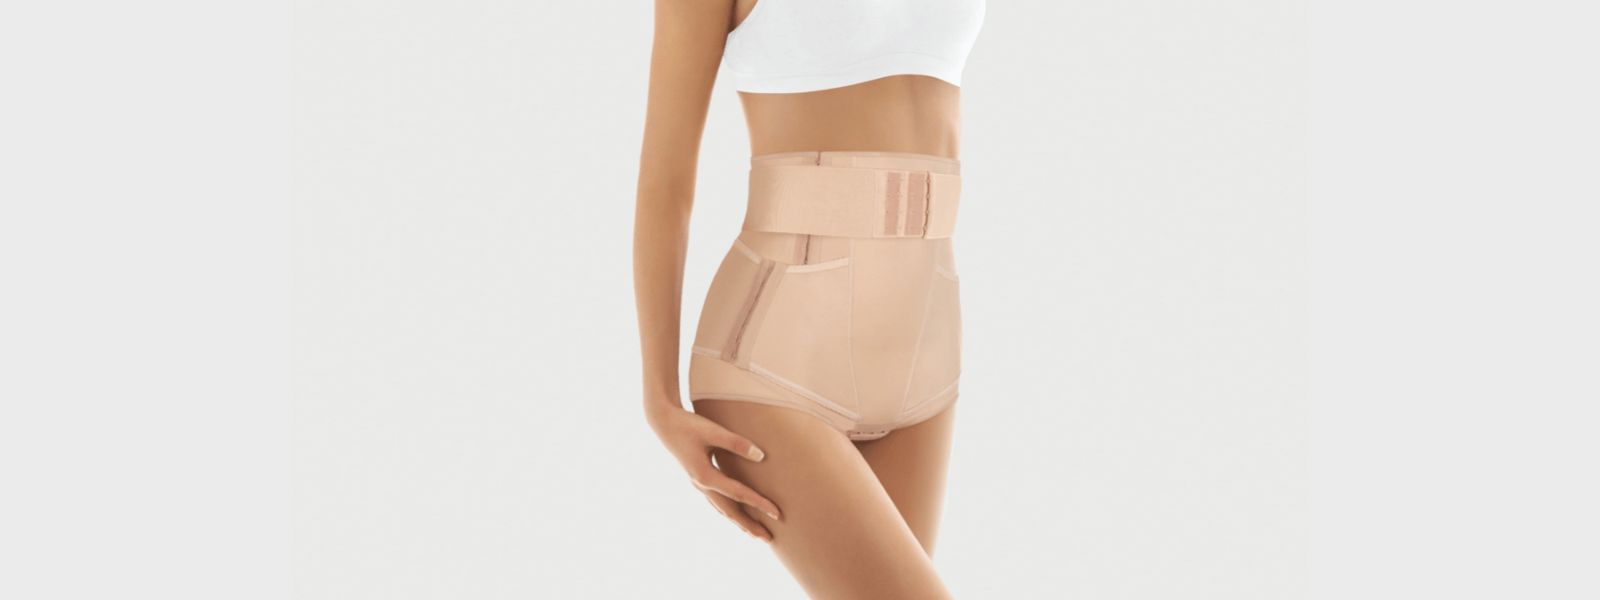 medical compression garment after tummy tuck & liposuction surgery